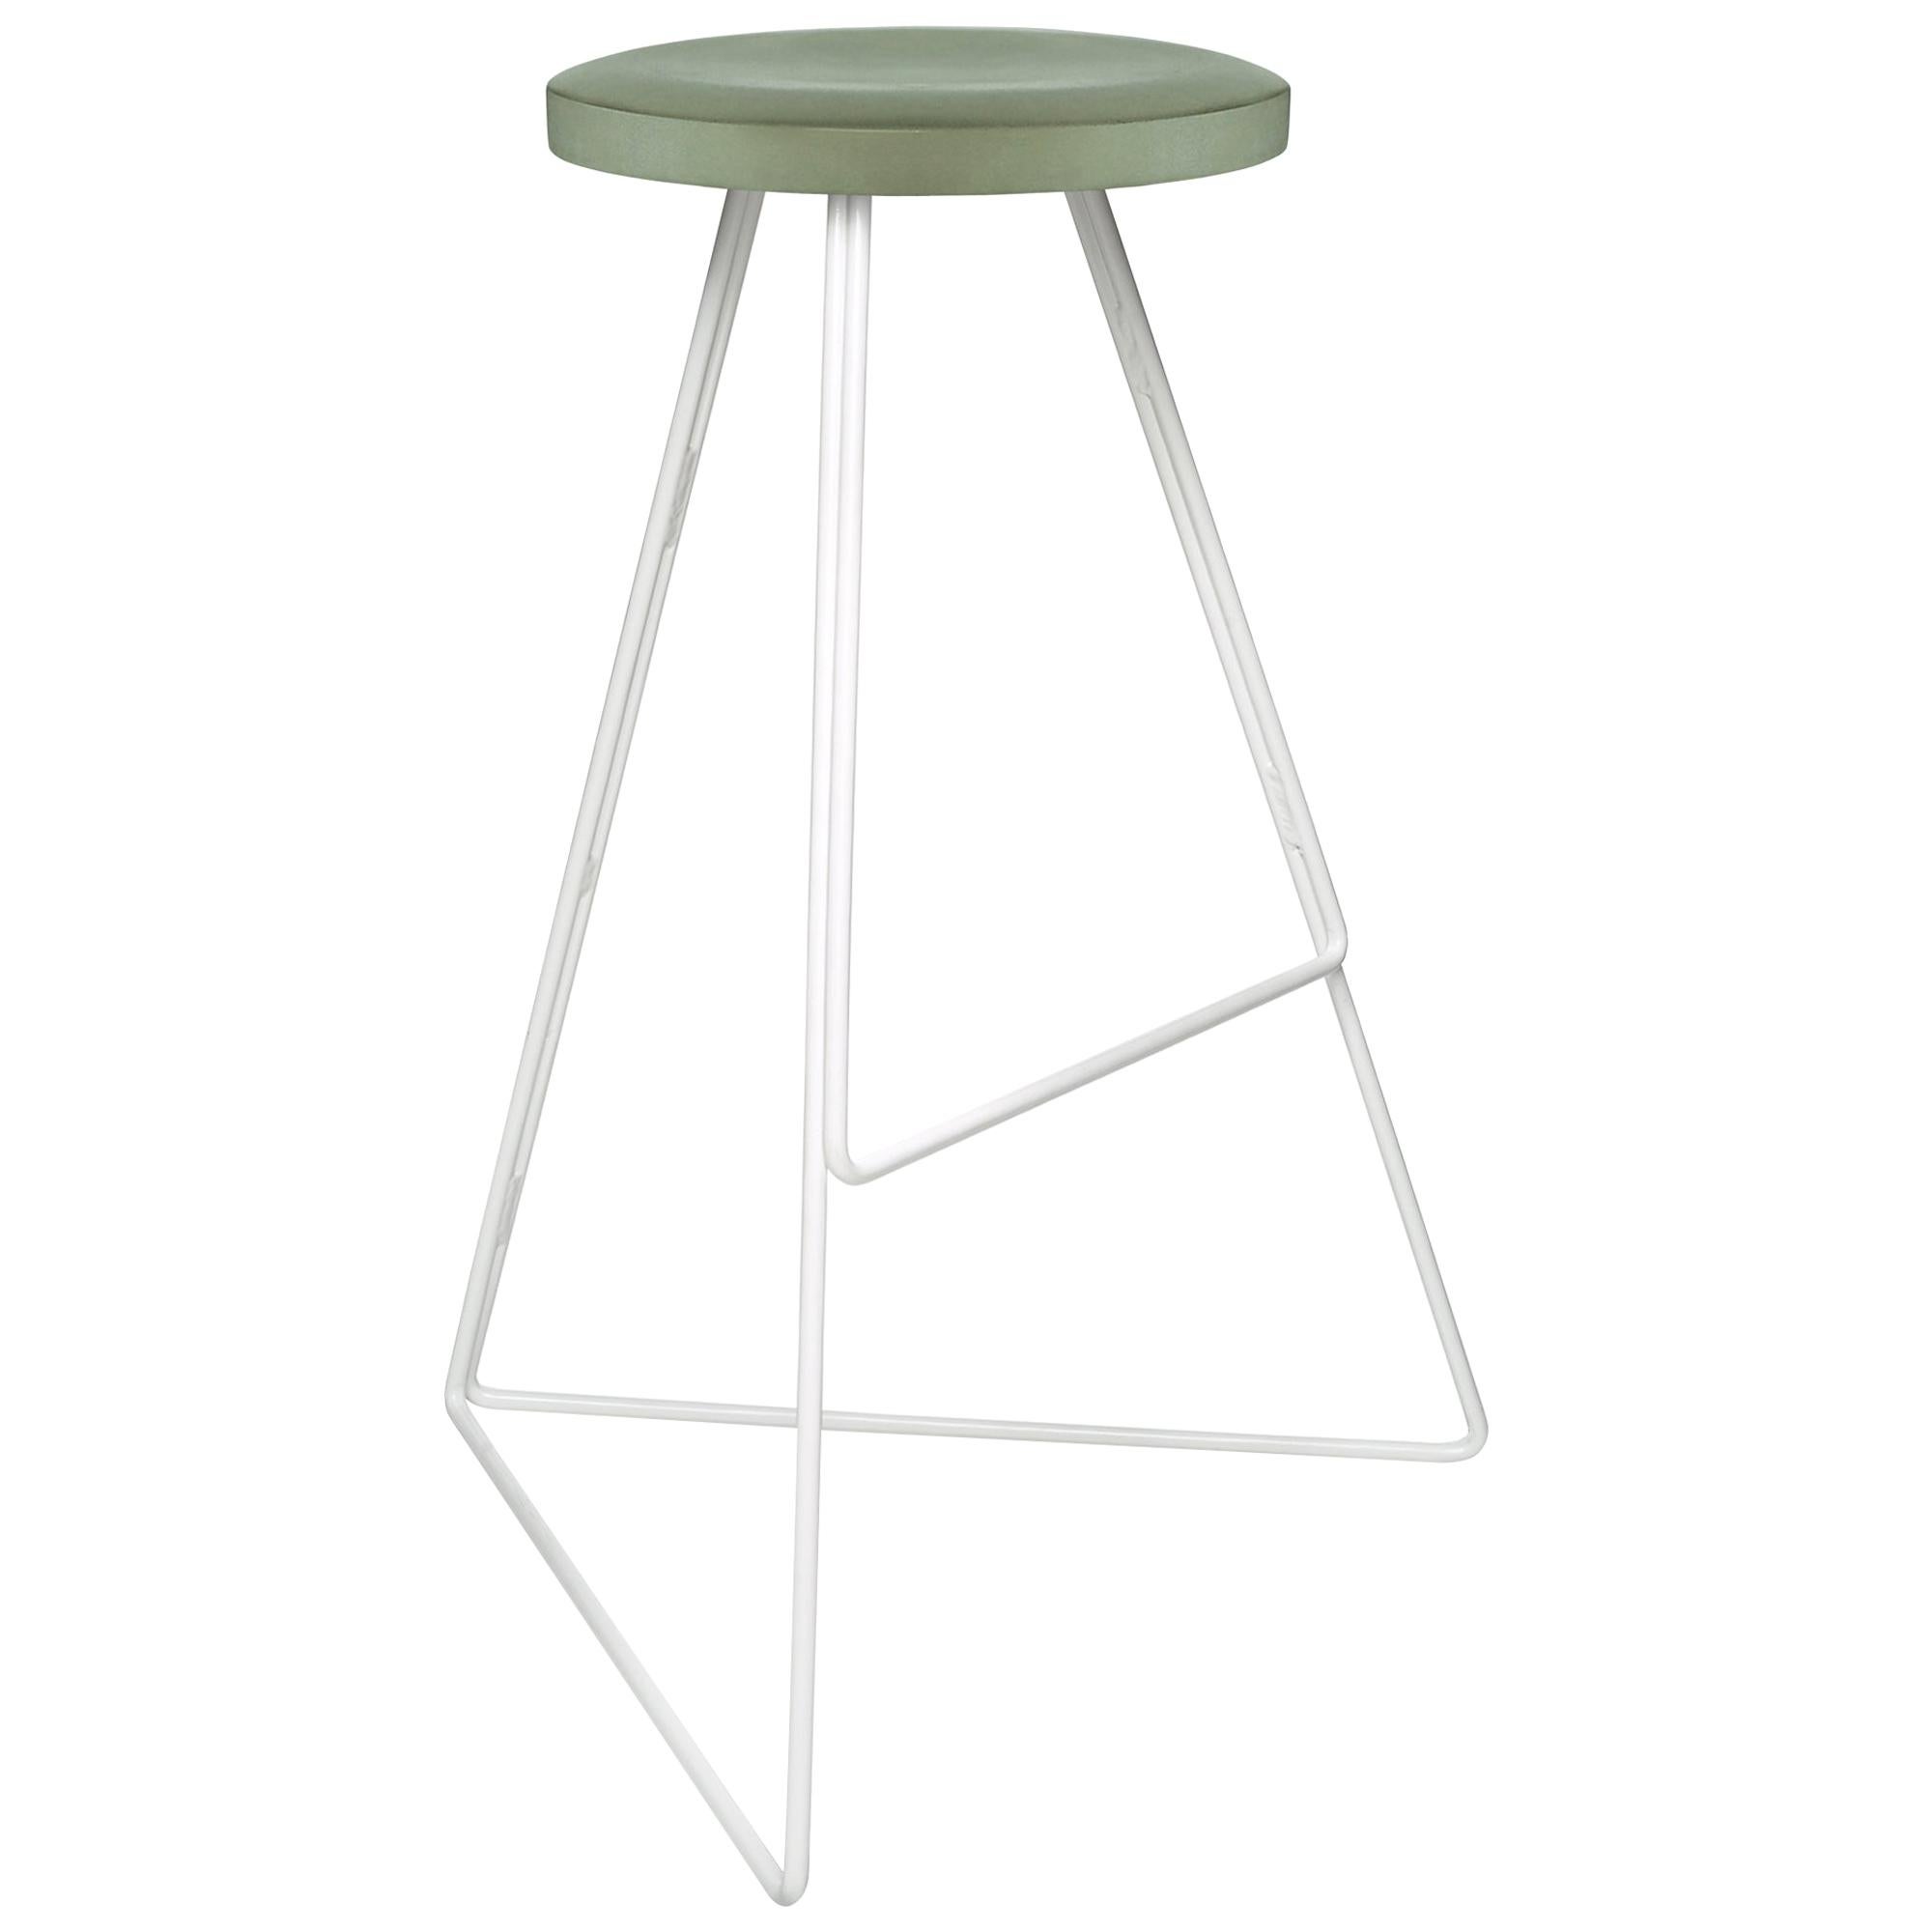 The Coleman Stool, White + Aspen, Counter Height, 54 Variations, 100% USA Made For Sale